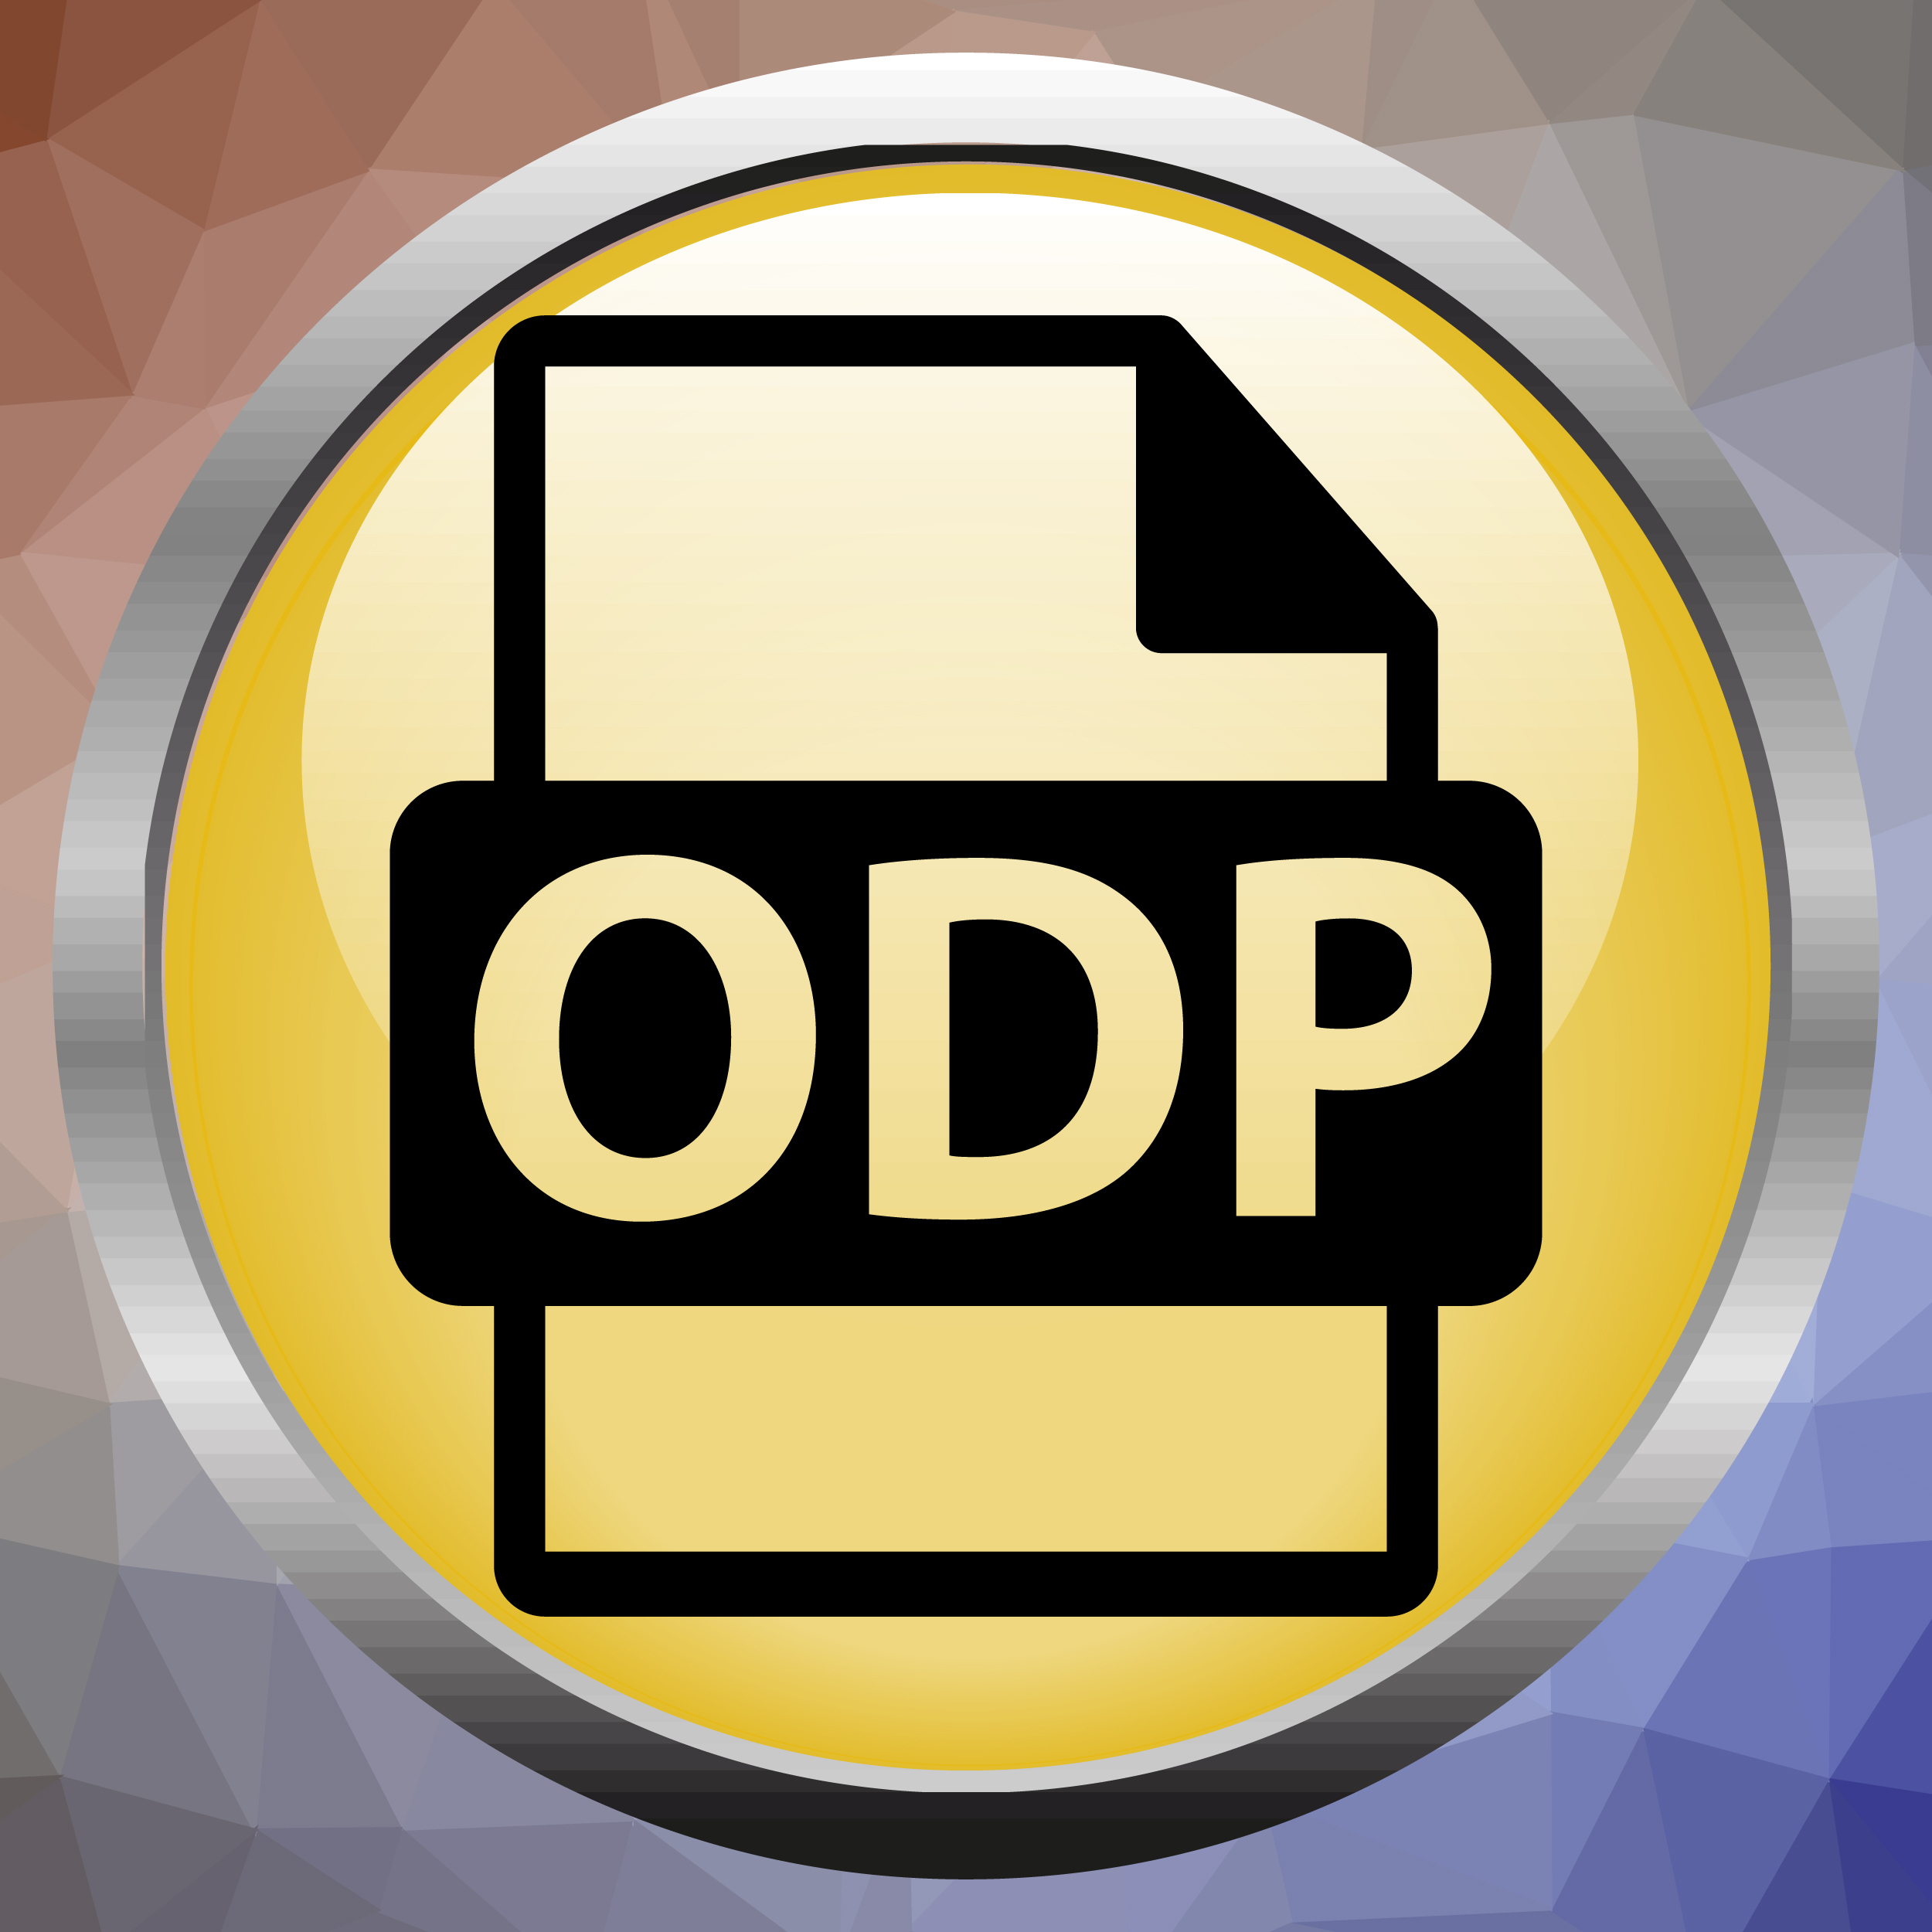 ODPANN 24-015: Enhancements to Remote Supports and Assistive Technology